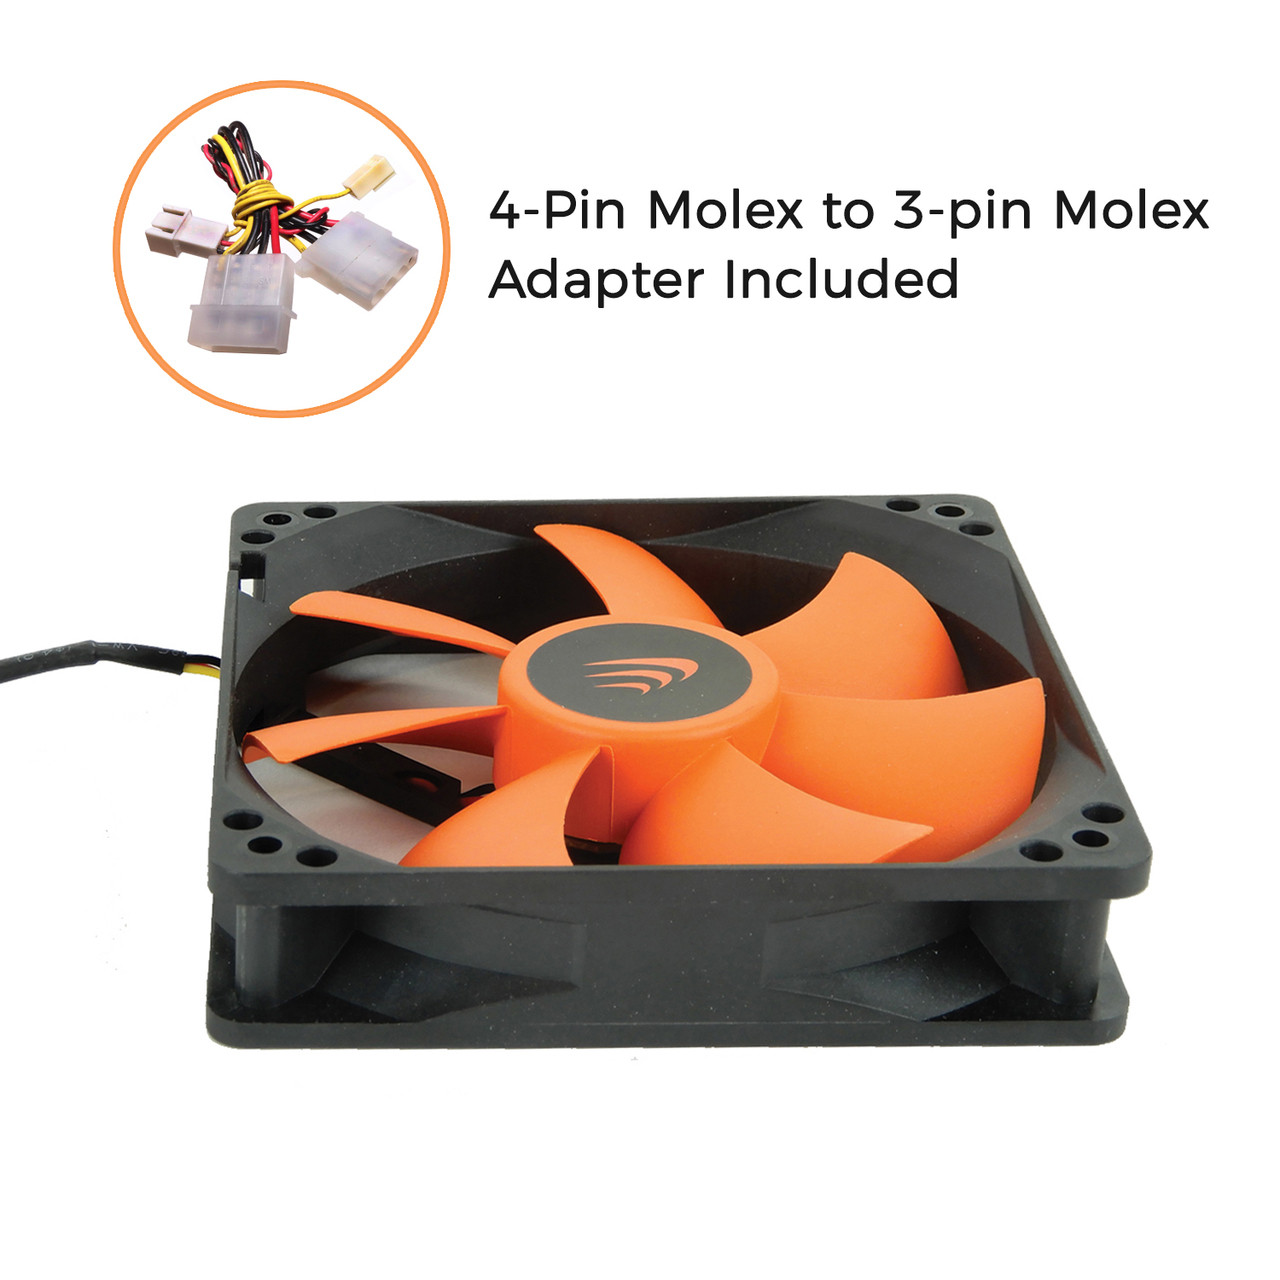 Set of 12 - AAAwave 120mm Double ball bearing Silent Cooling Fan, CPU Cooler, Water-Cooling Radiator and Case